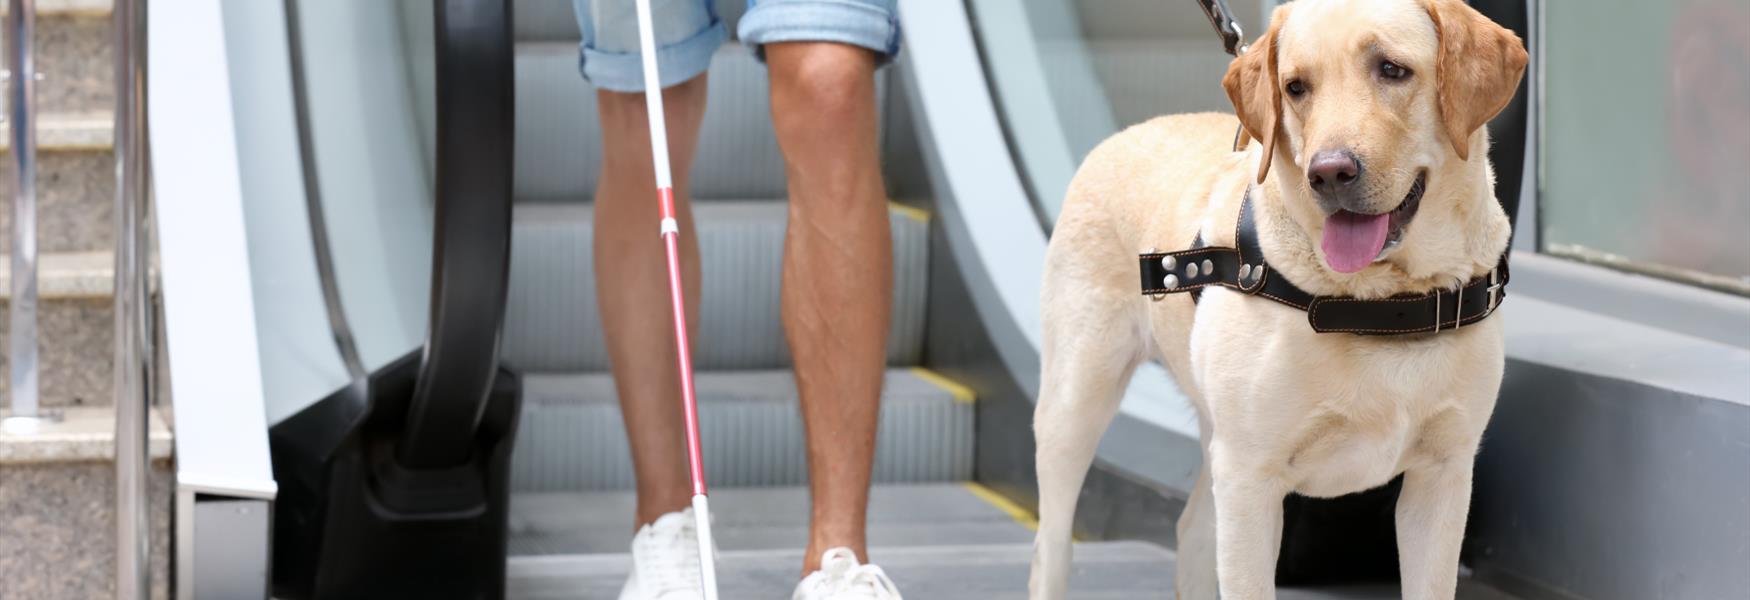 Guide dog at the bottom of escalator with owner